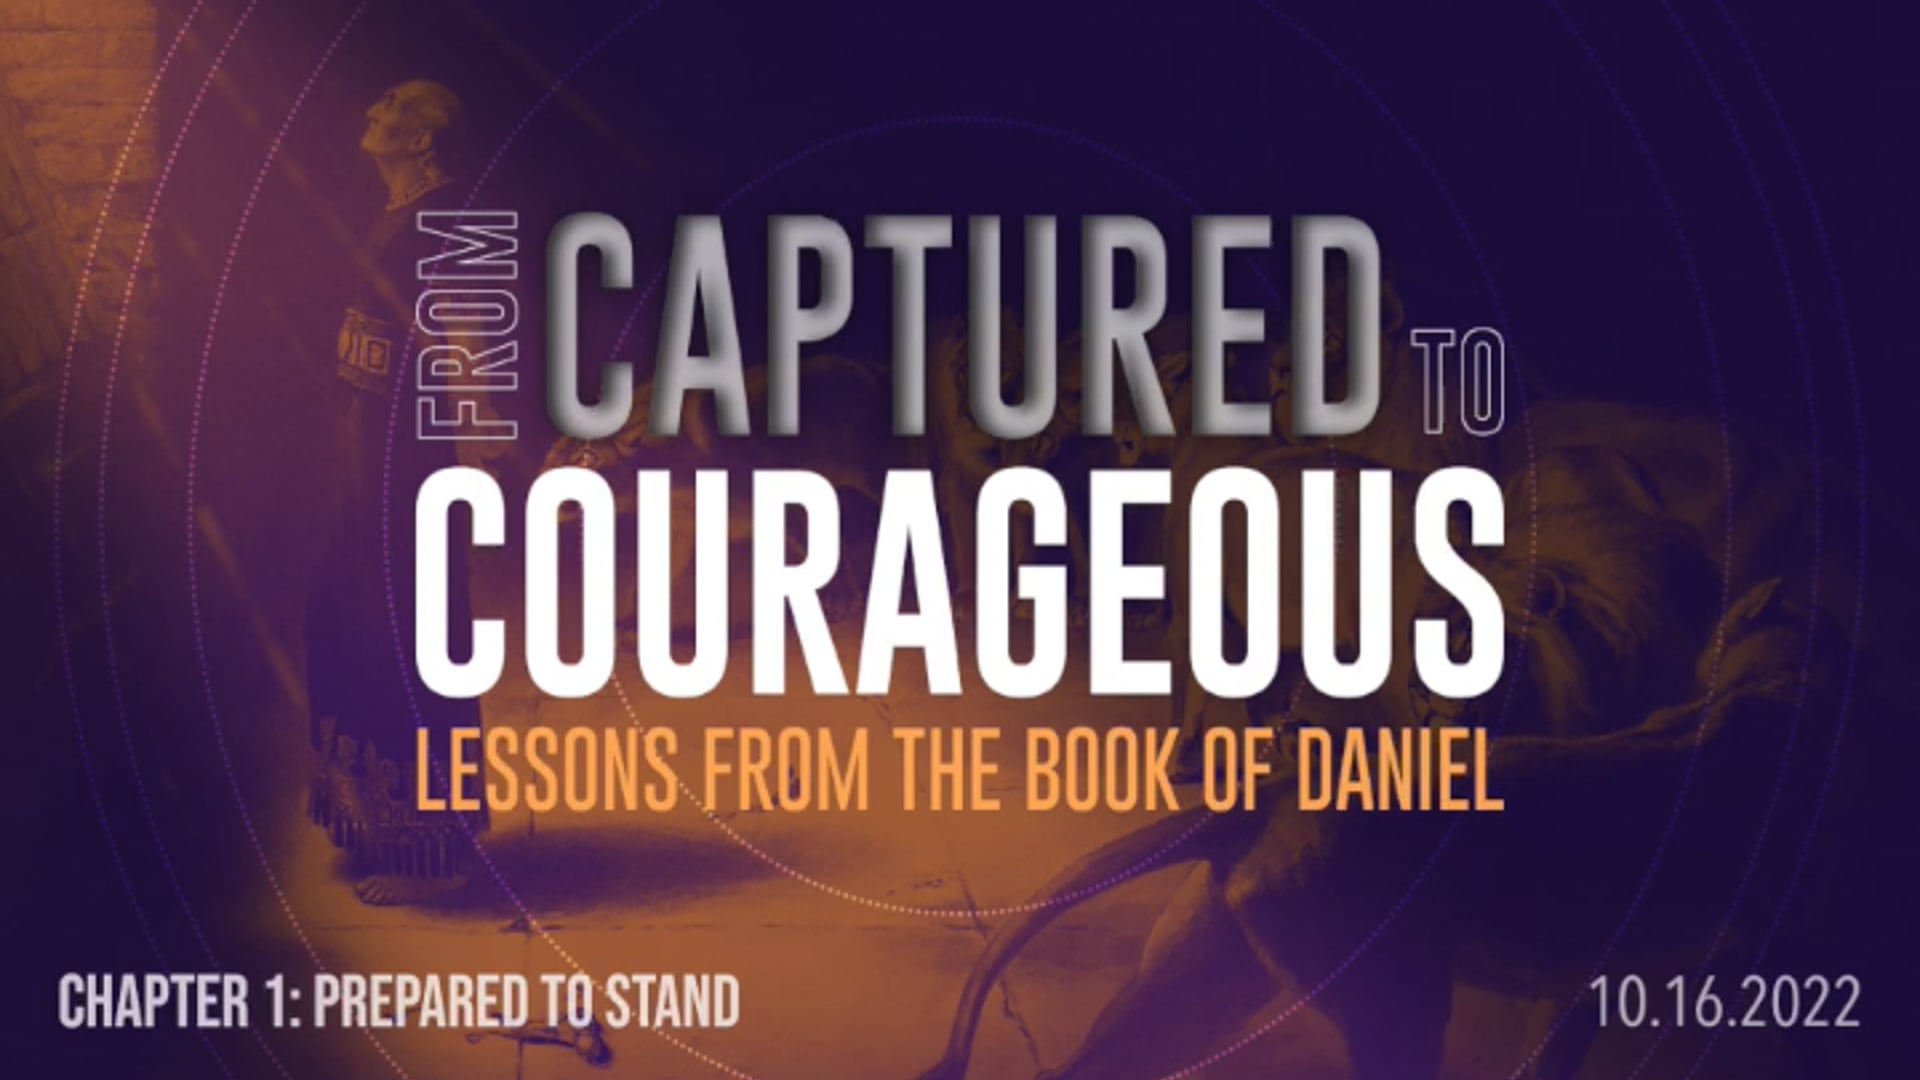 From Captured to Courageous - Part 1: Prepared to Stand